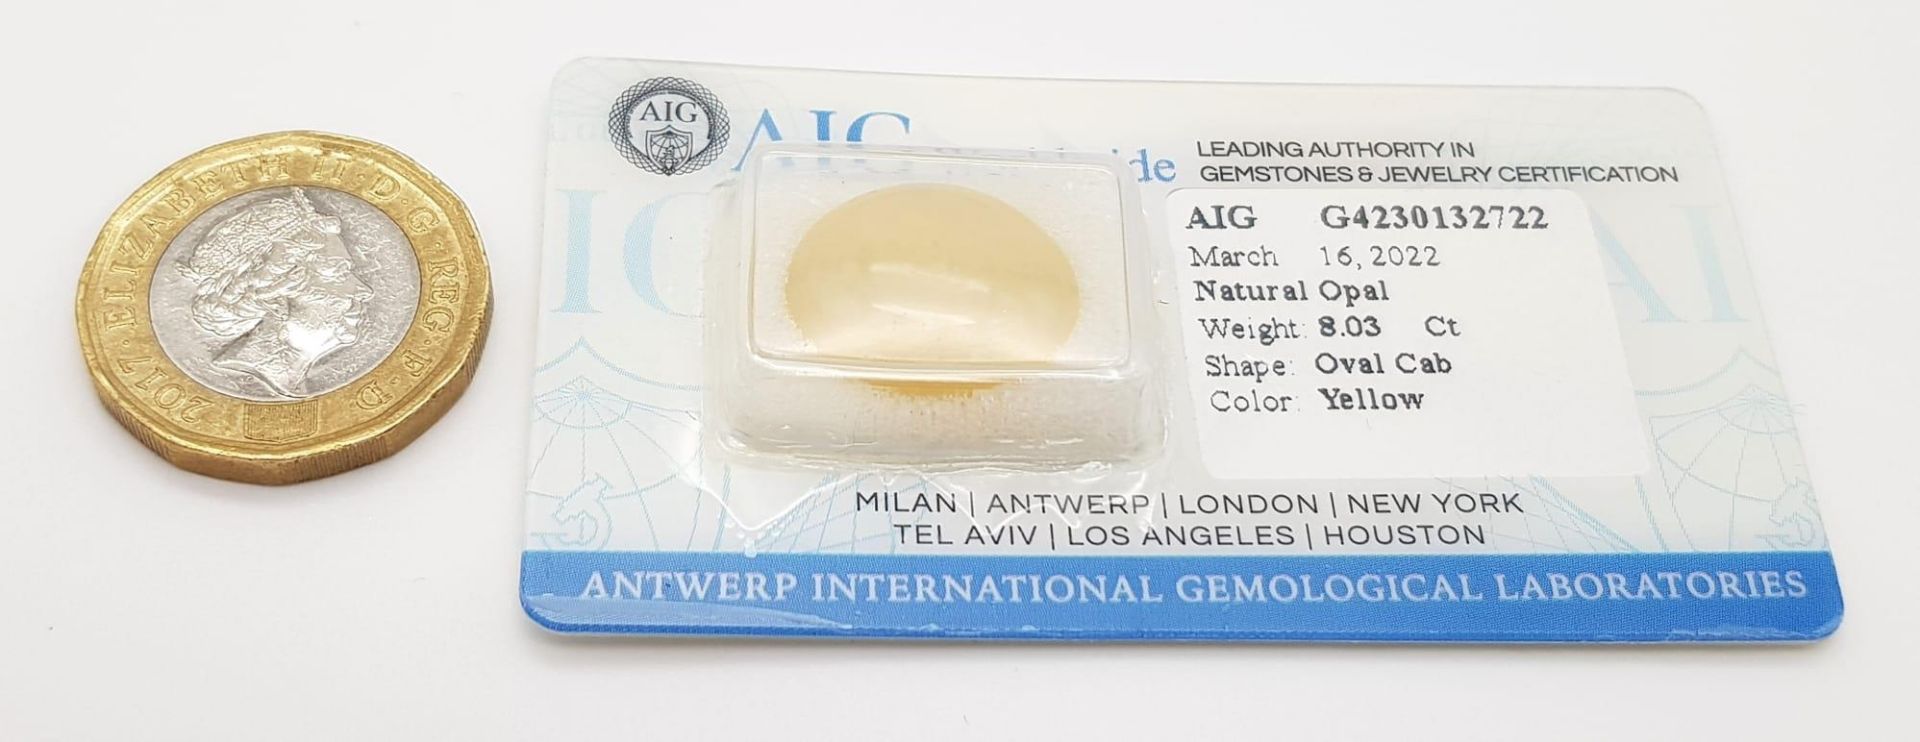 8.03ct Ethiopian Opal Gemstone Sealed with AIG Milan Italian Certification - Image 4 of 4